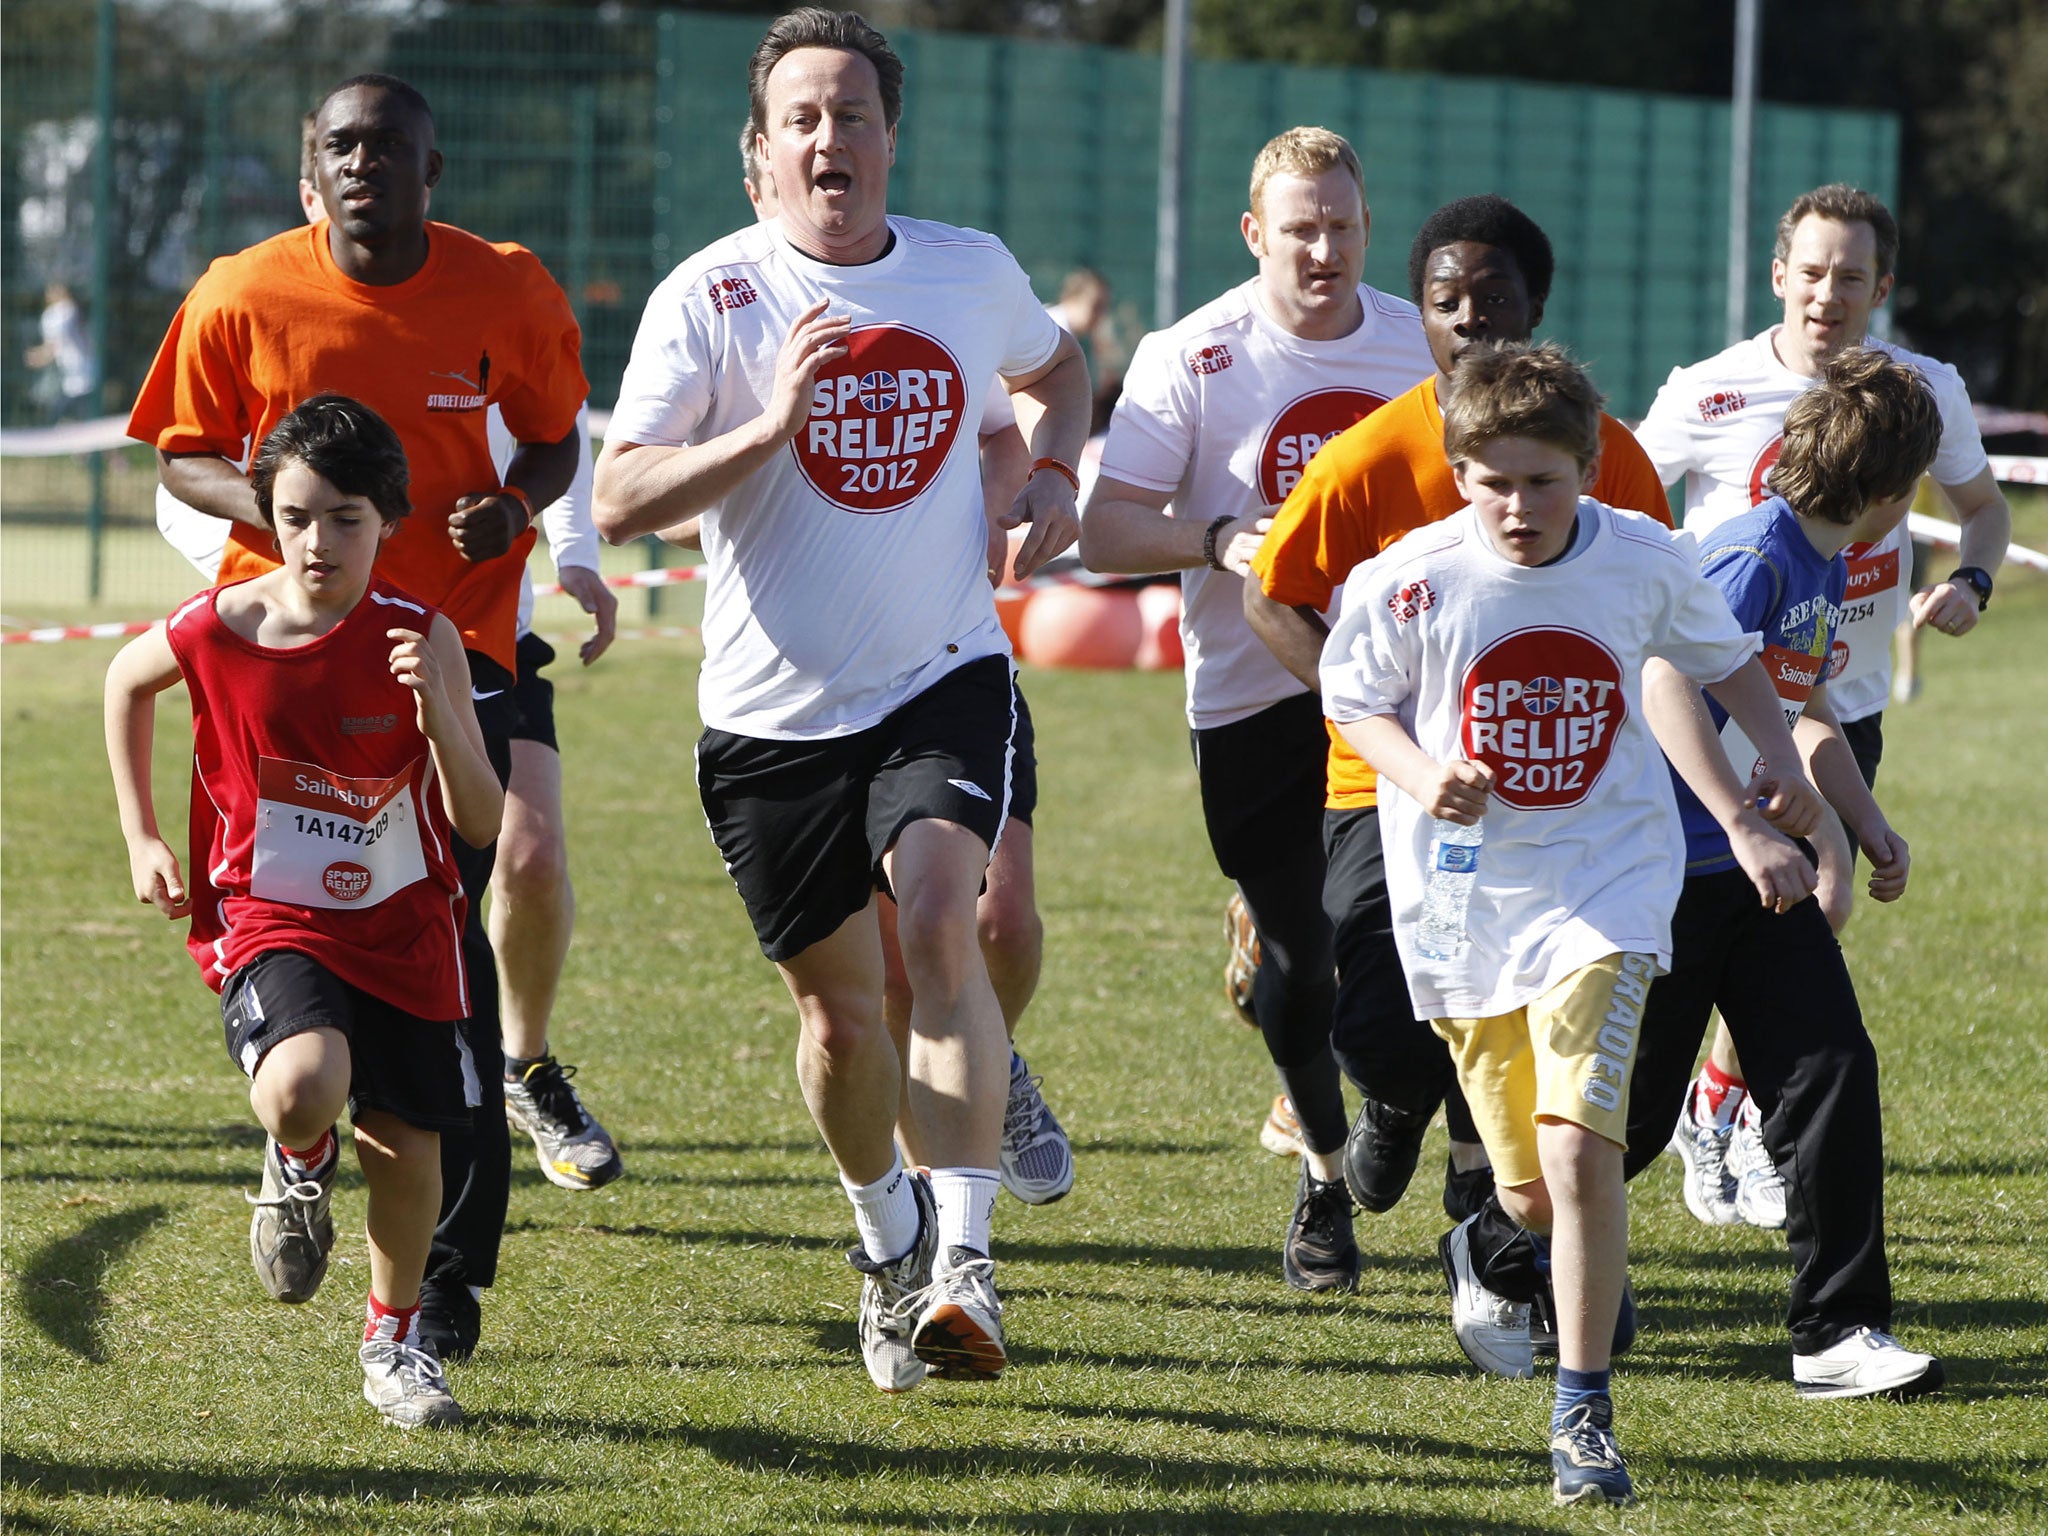 David Cameron, (C) runs a mile race for Sports Relief charity, 2012